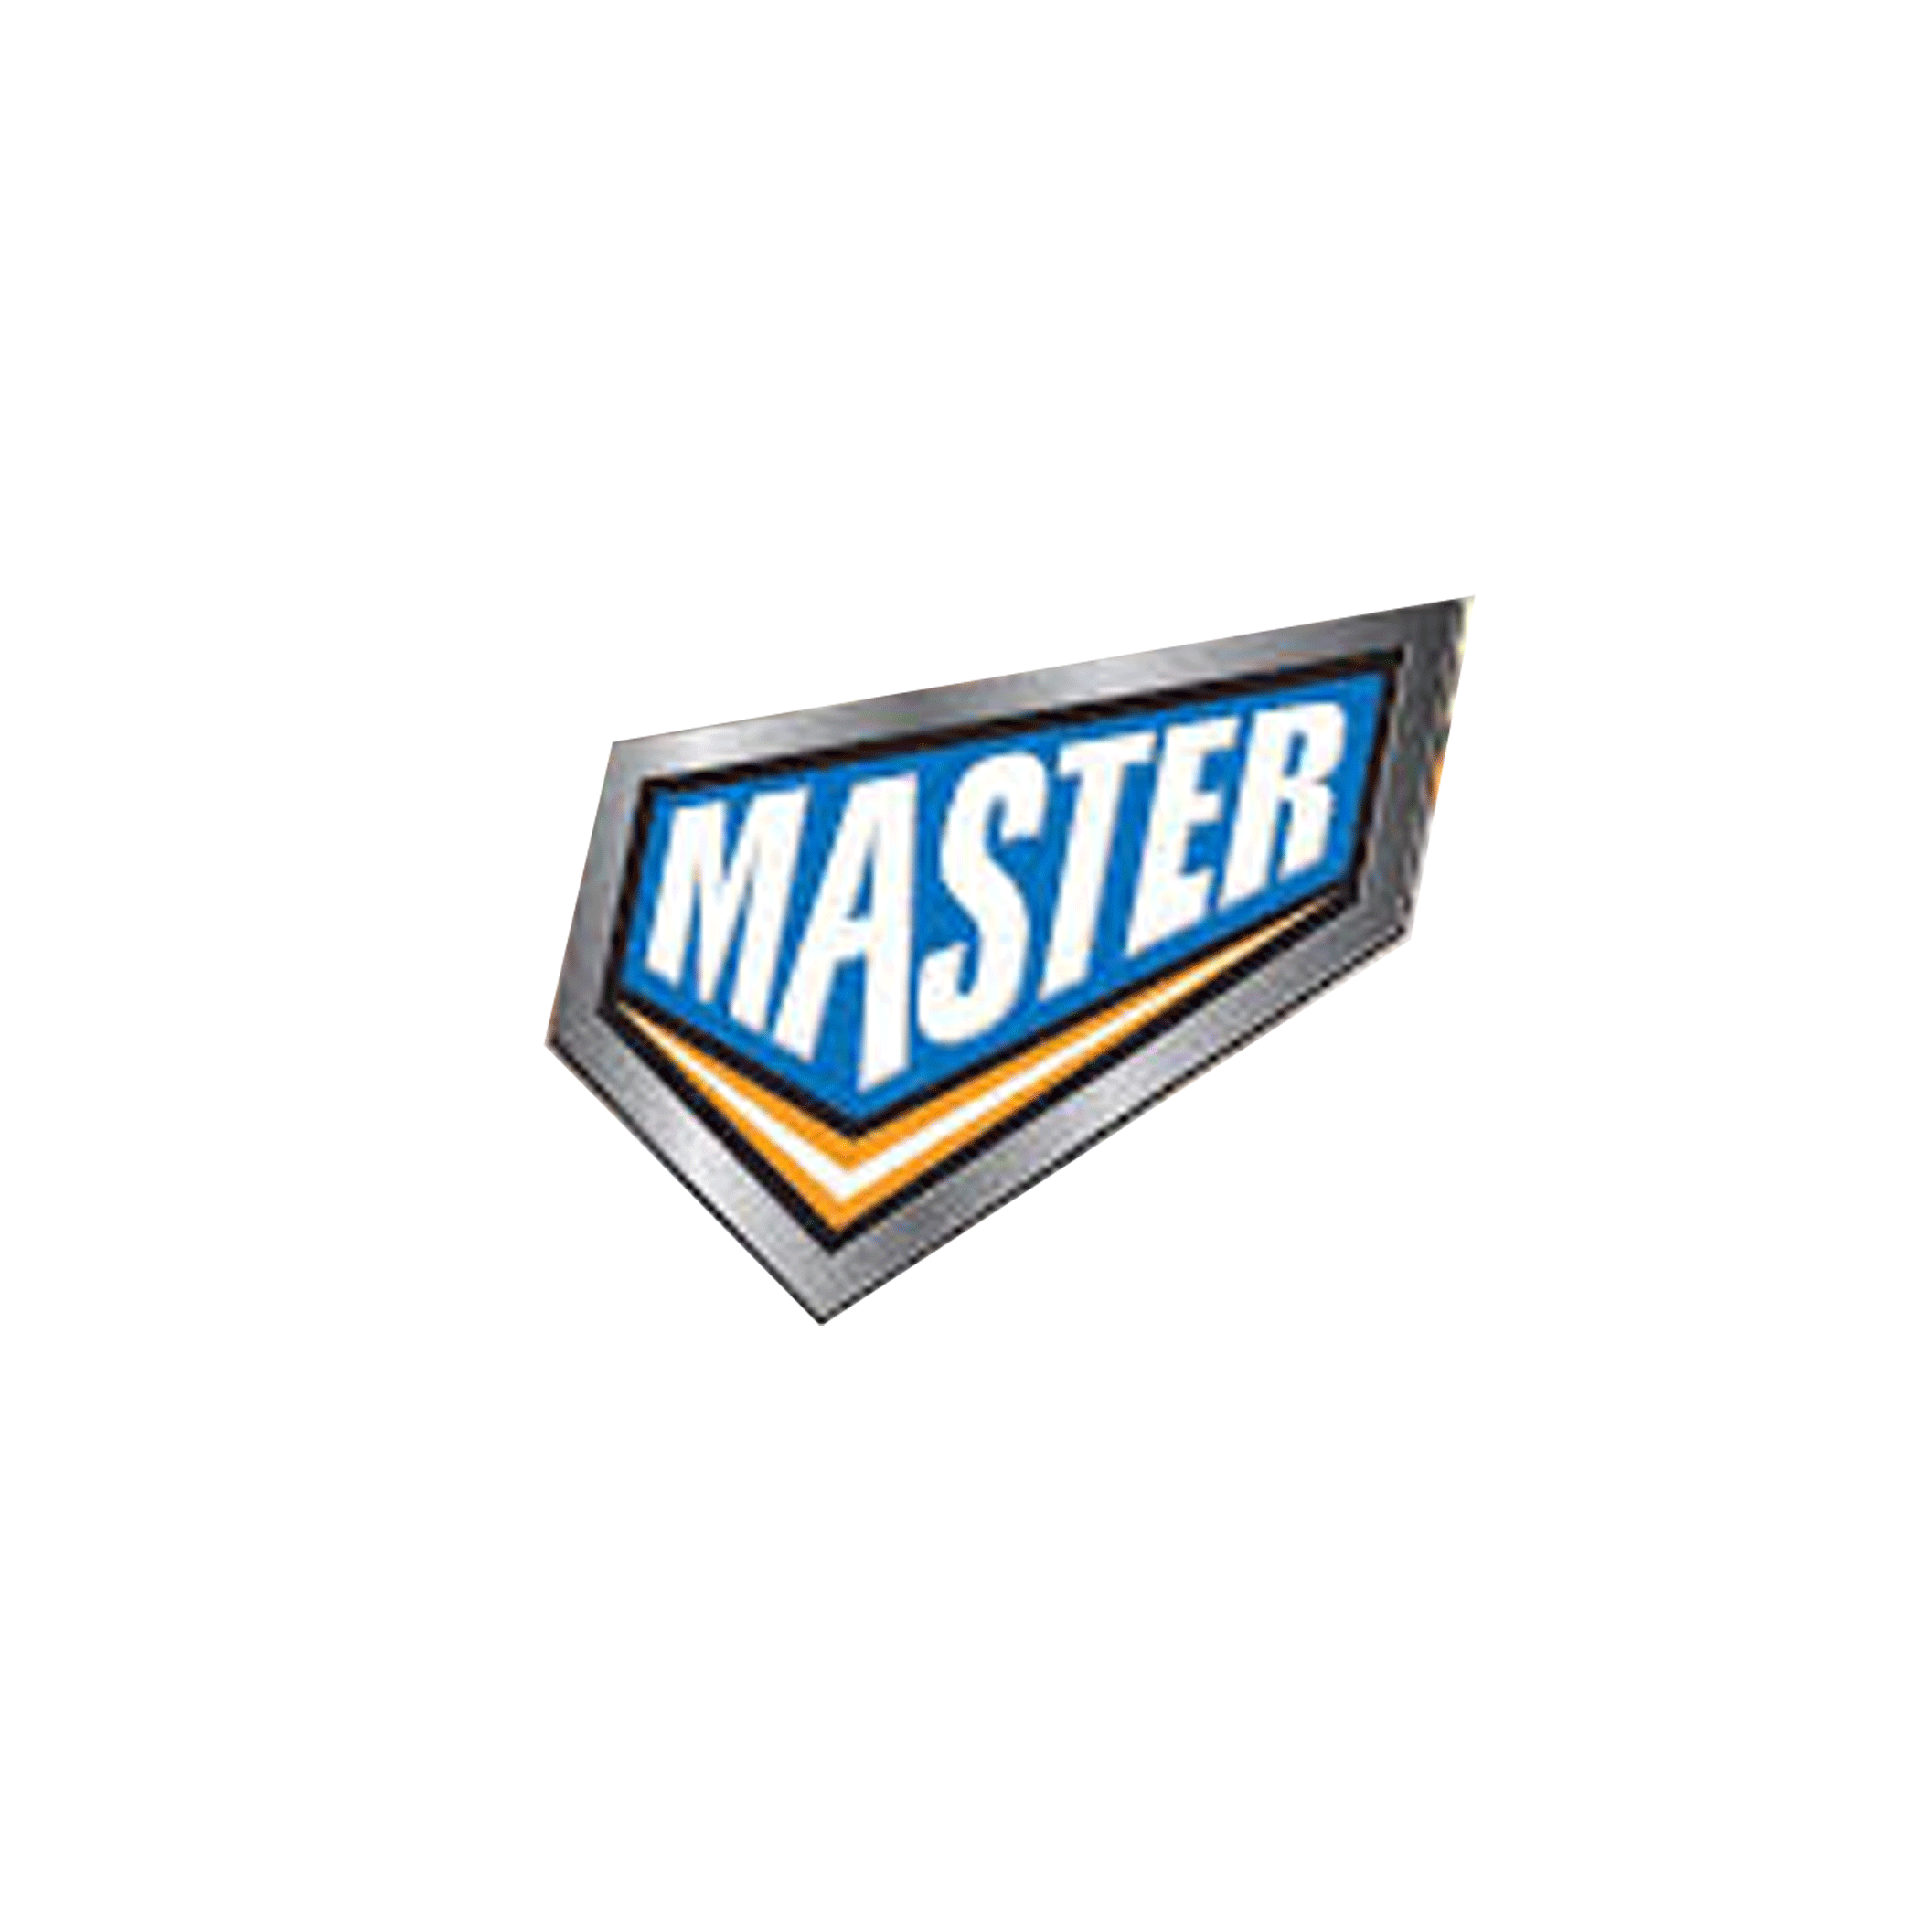 Product Brand: Master